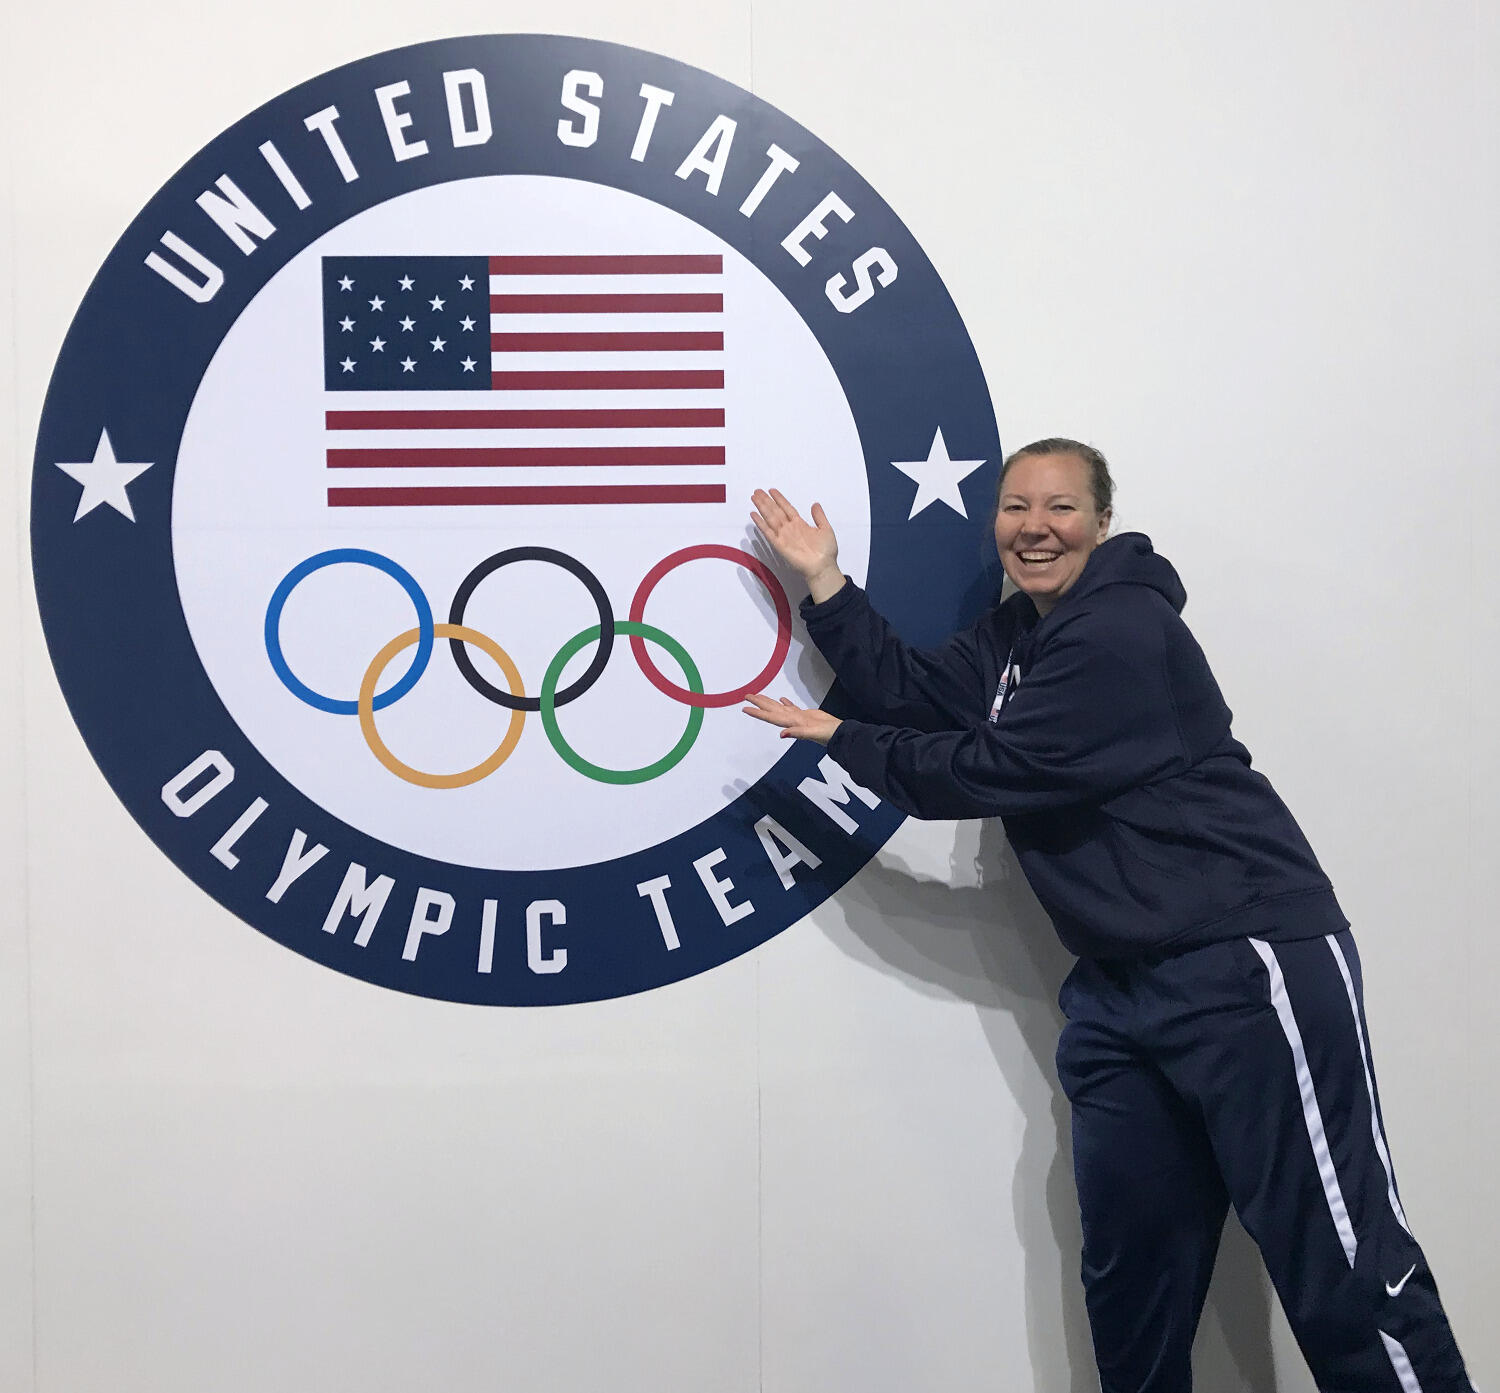 Nelson has been aiming to volunteer with Team Processing at the Olympics since she found out about the opportunity during her internship with USA Taekwondo while studying at VCU.